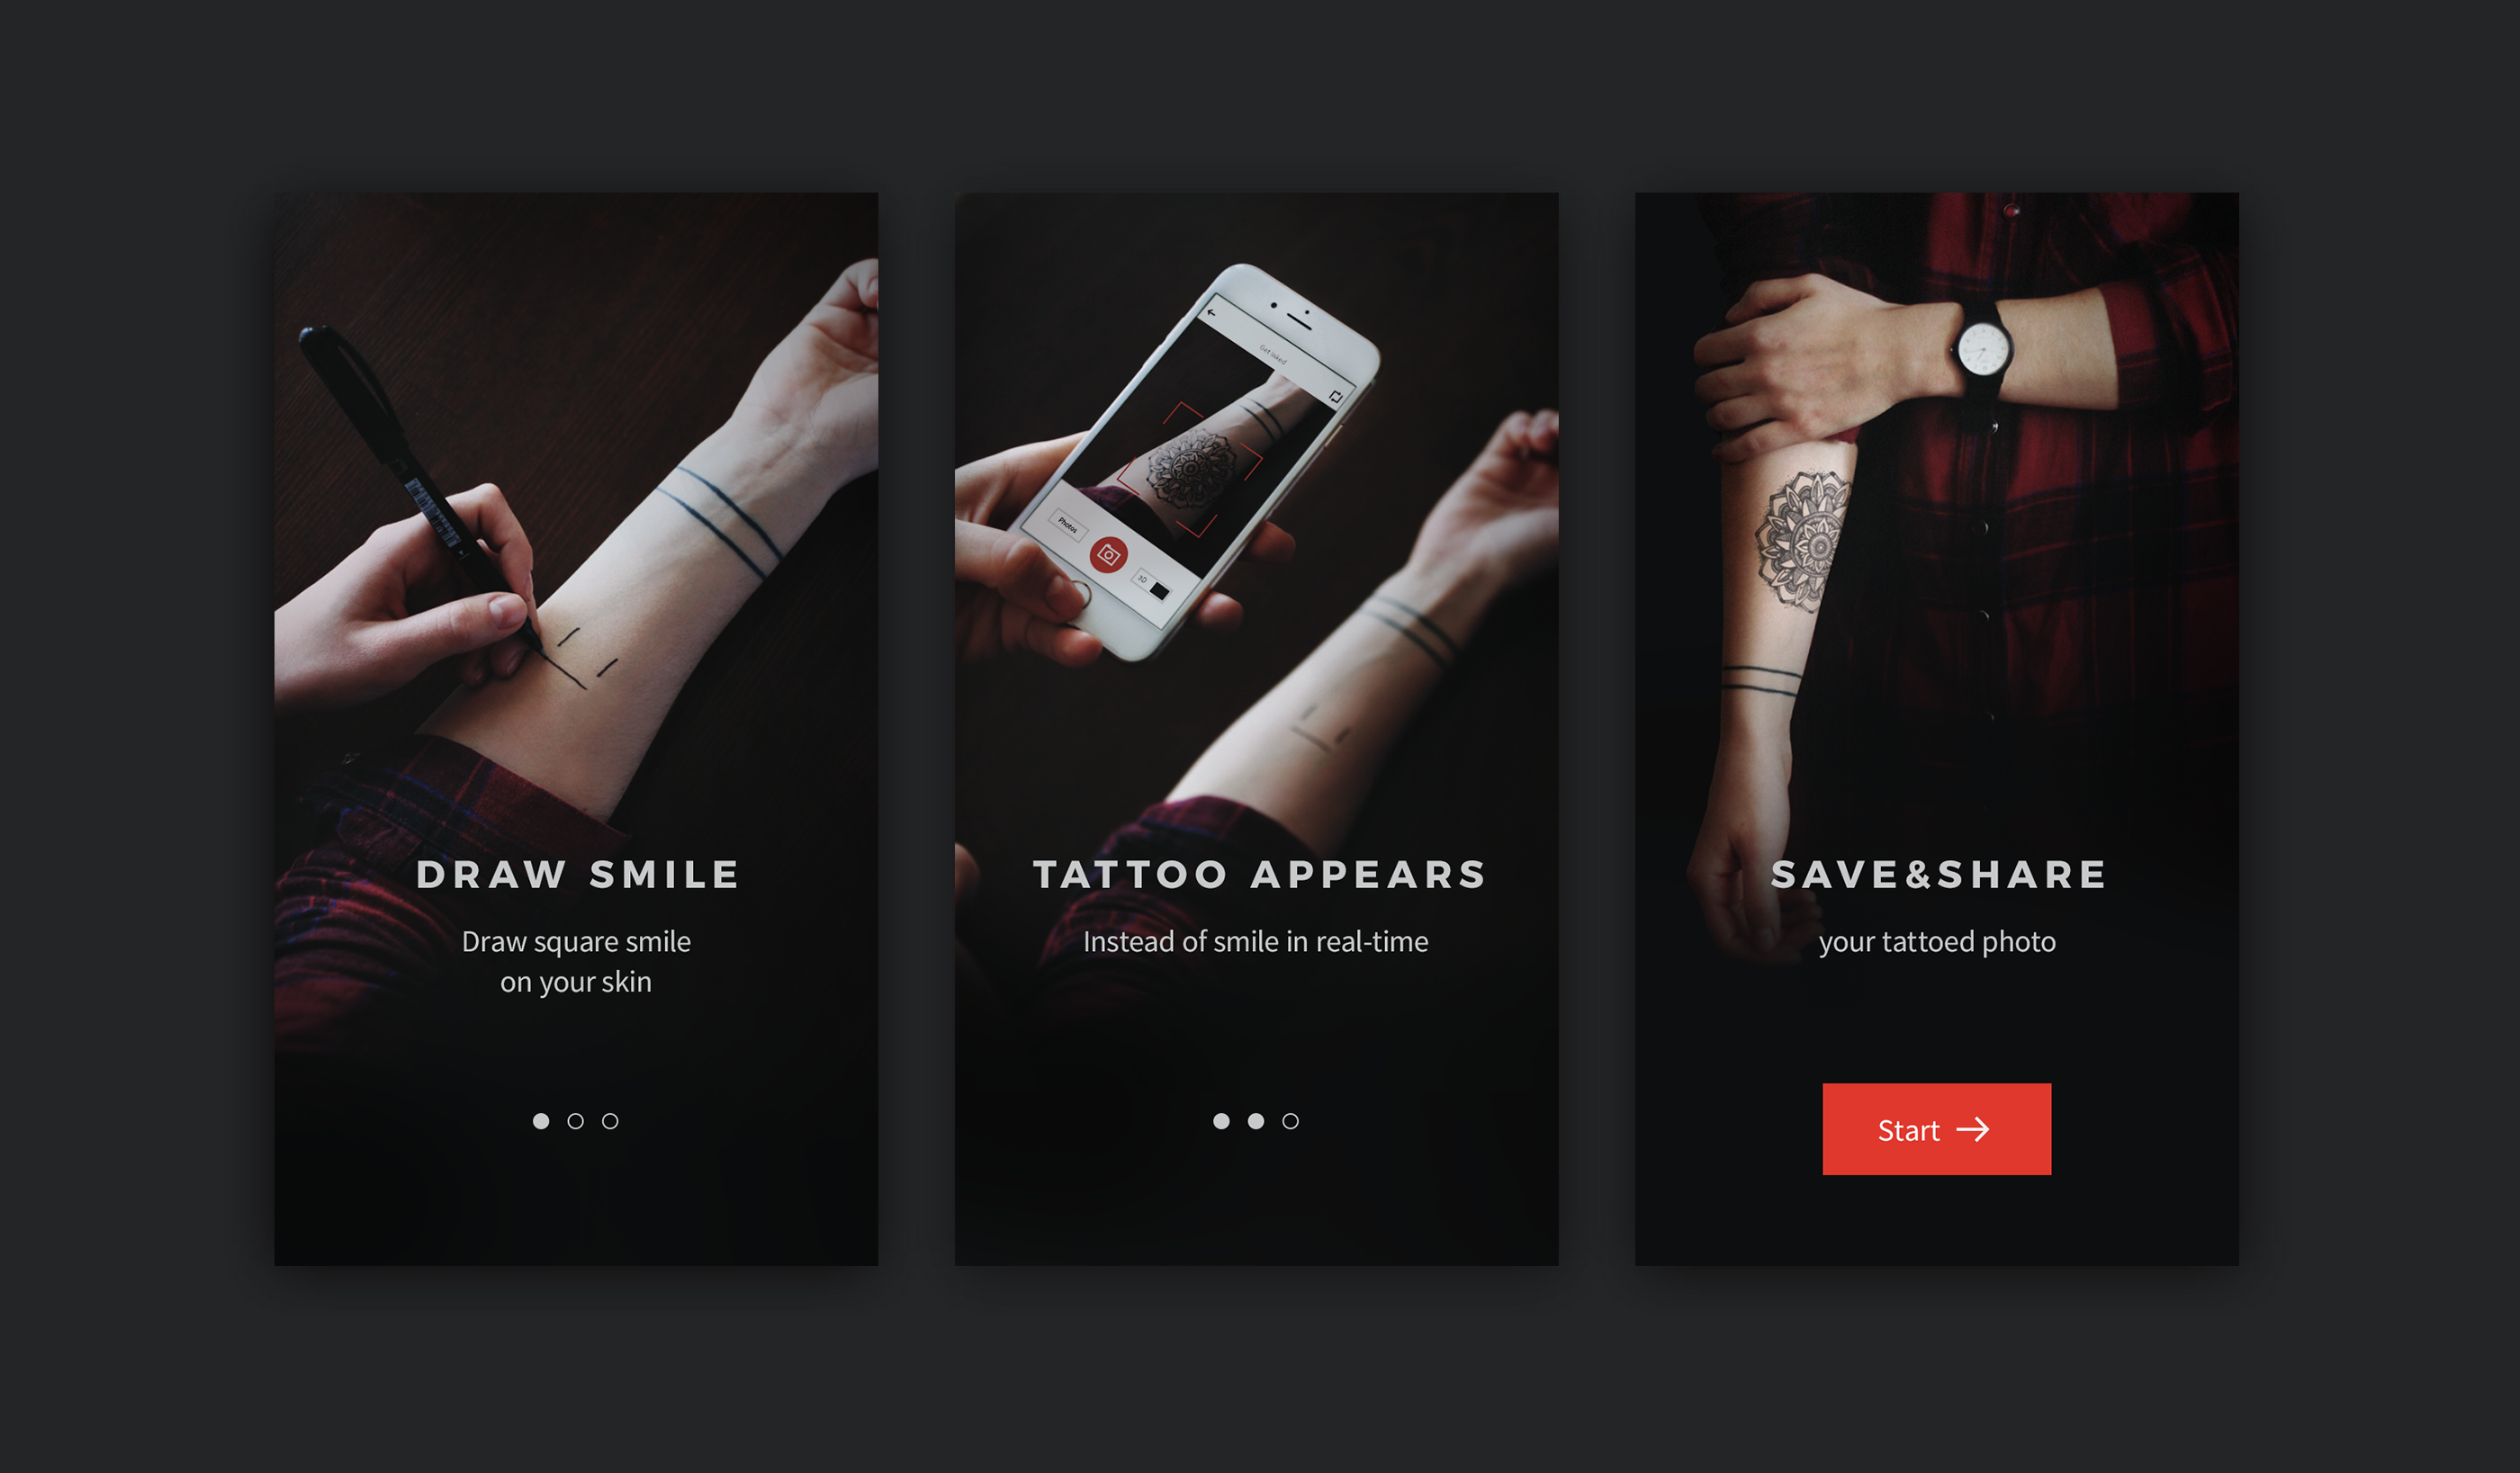 Simulation of a Tattoo: Get to Know the Tattoo Simulator Application